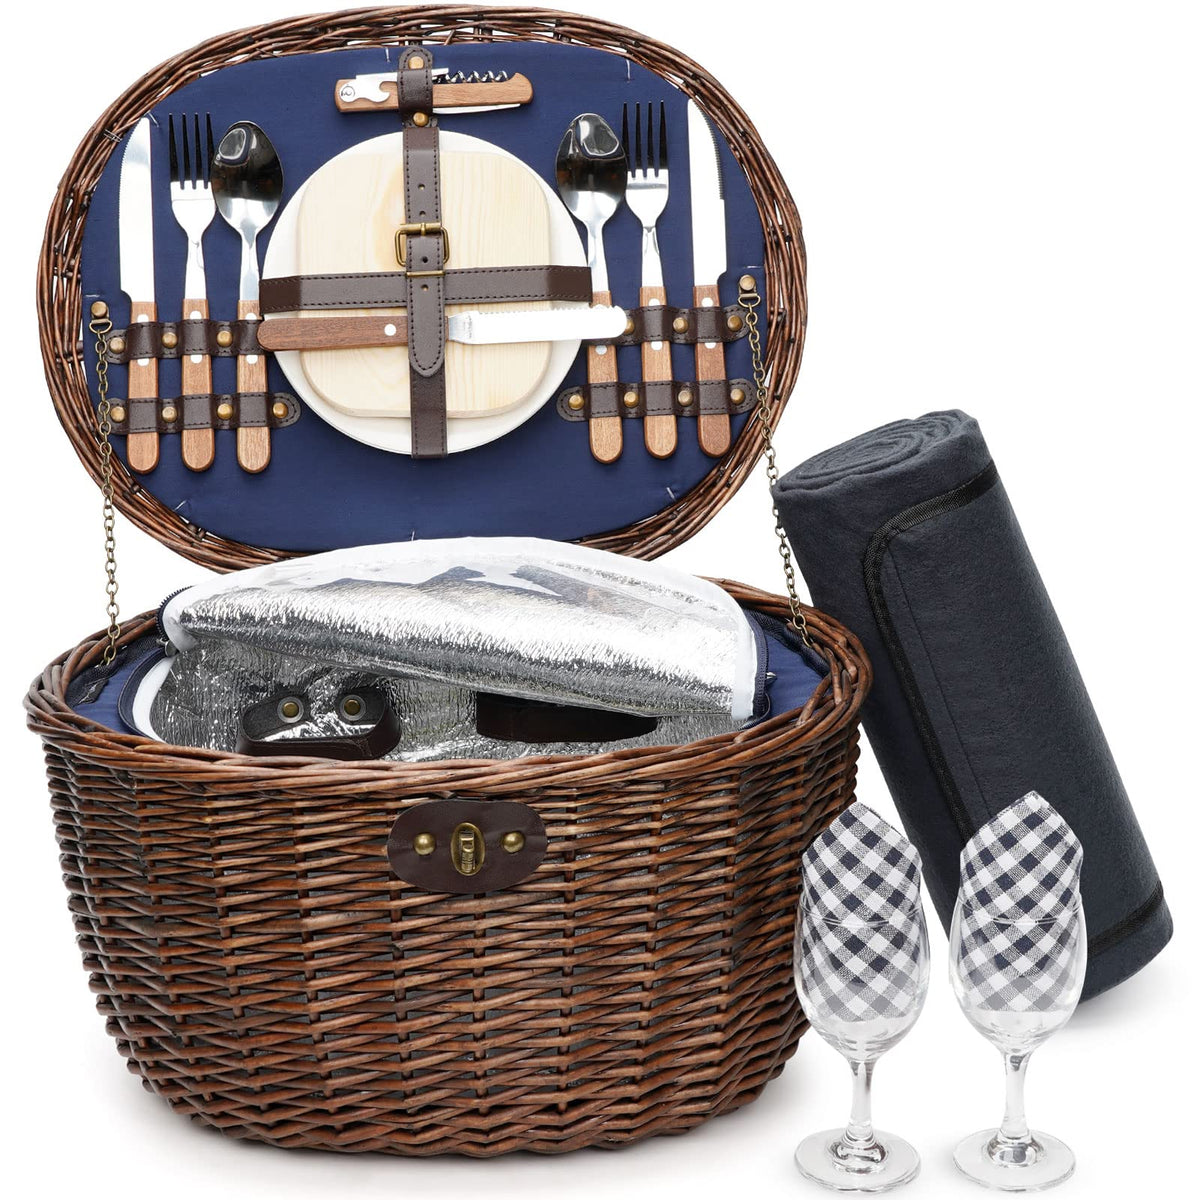 Unique Willow Picnic Basket for 2 Persons